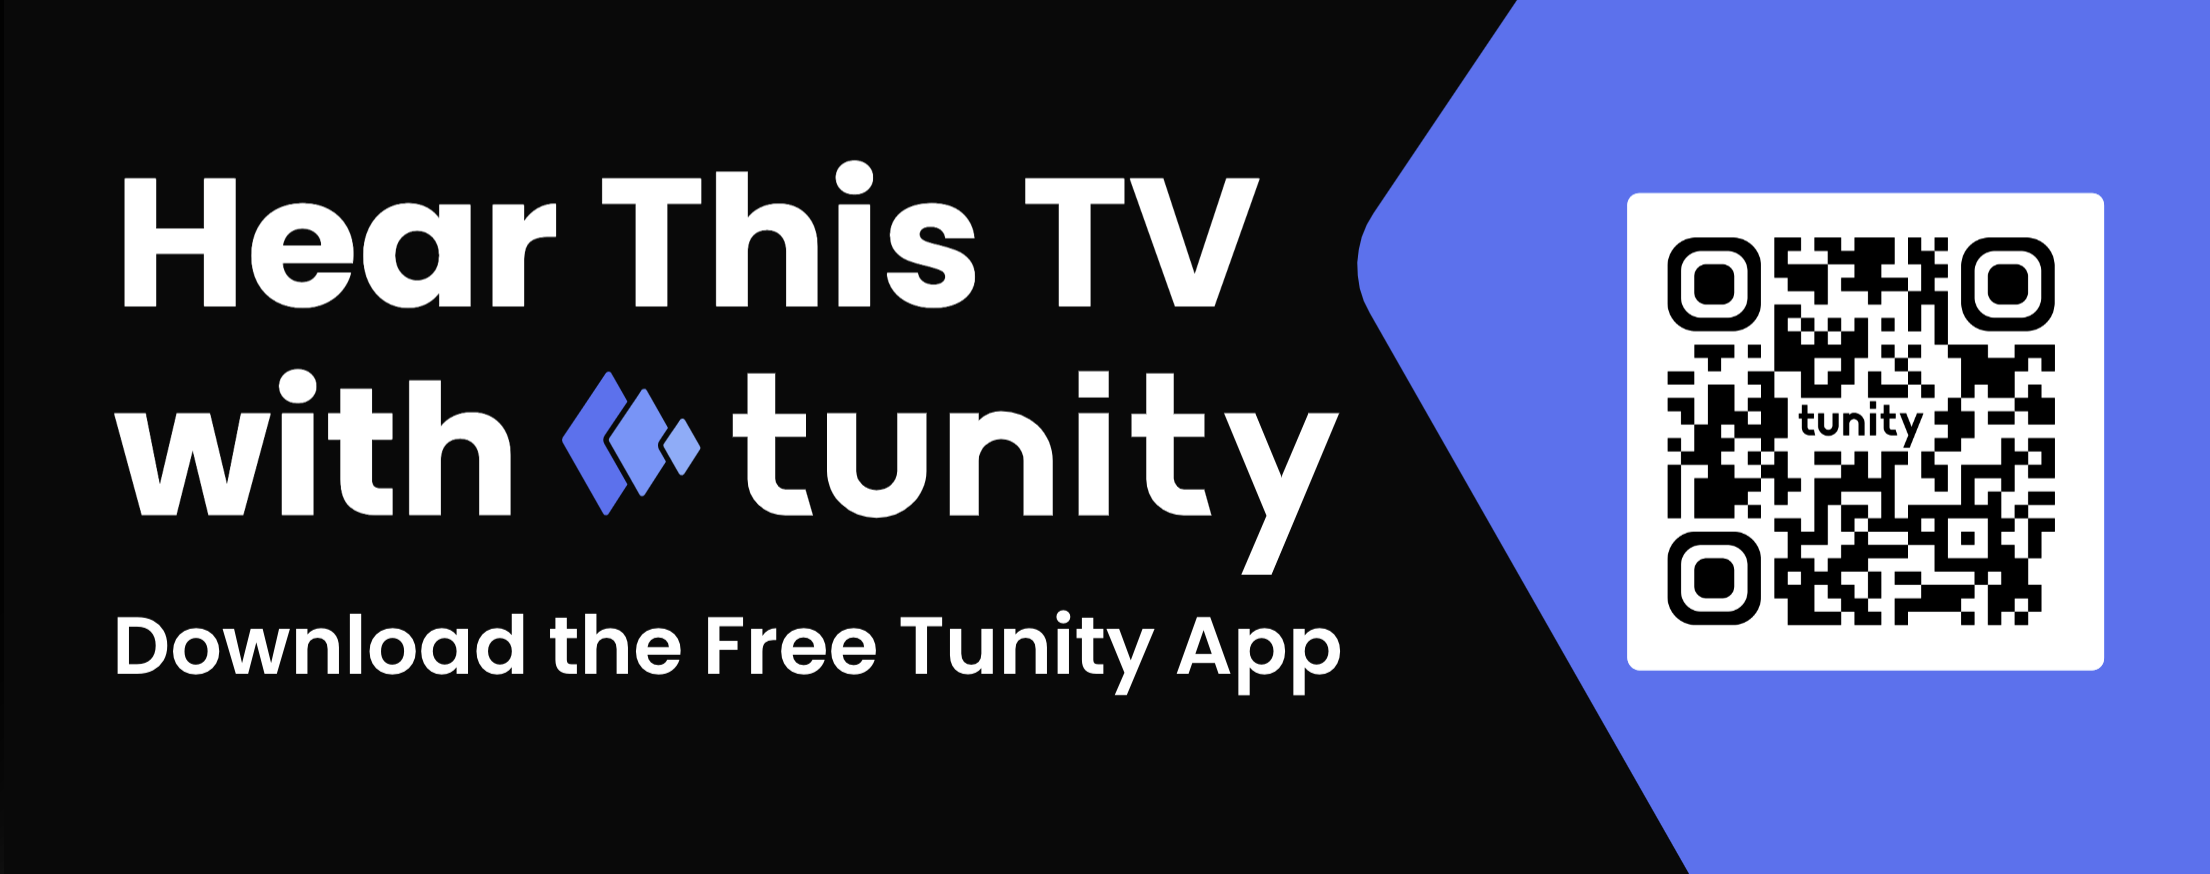 Hear this TV with Tunity TV Sign